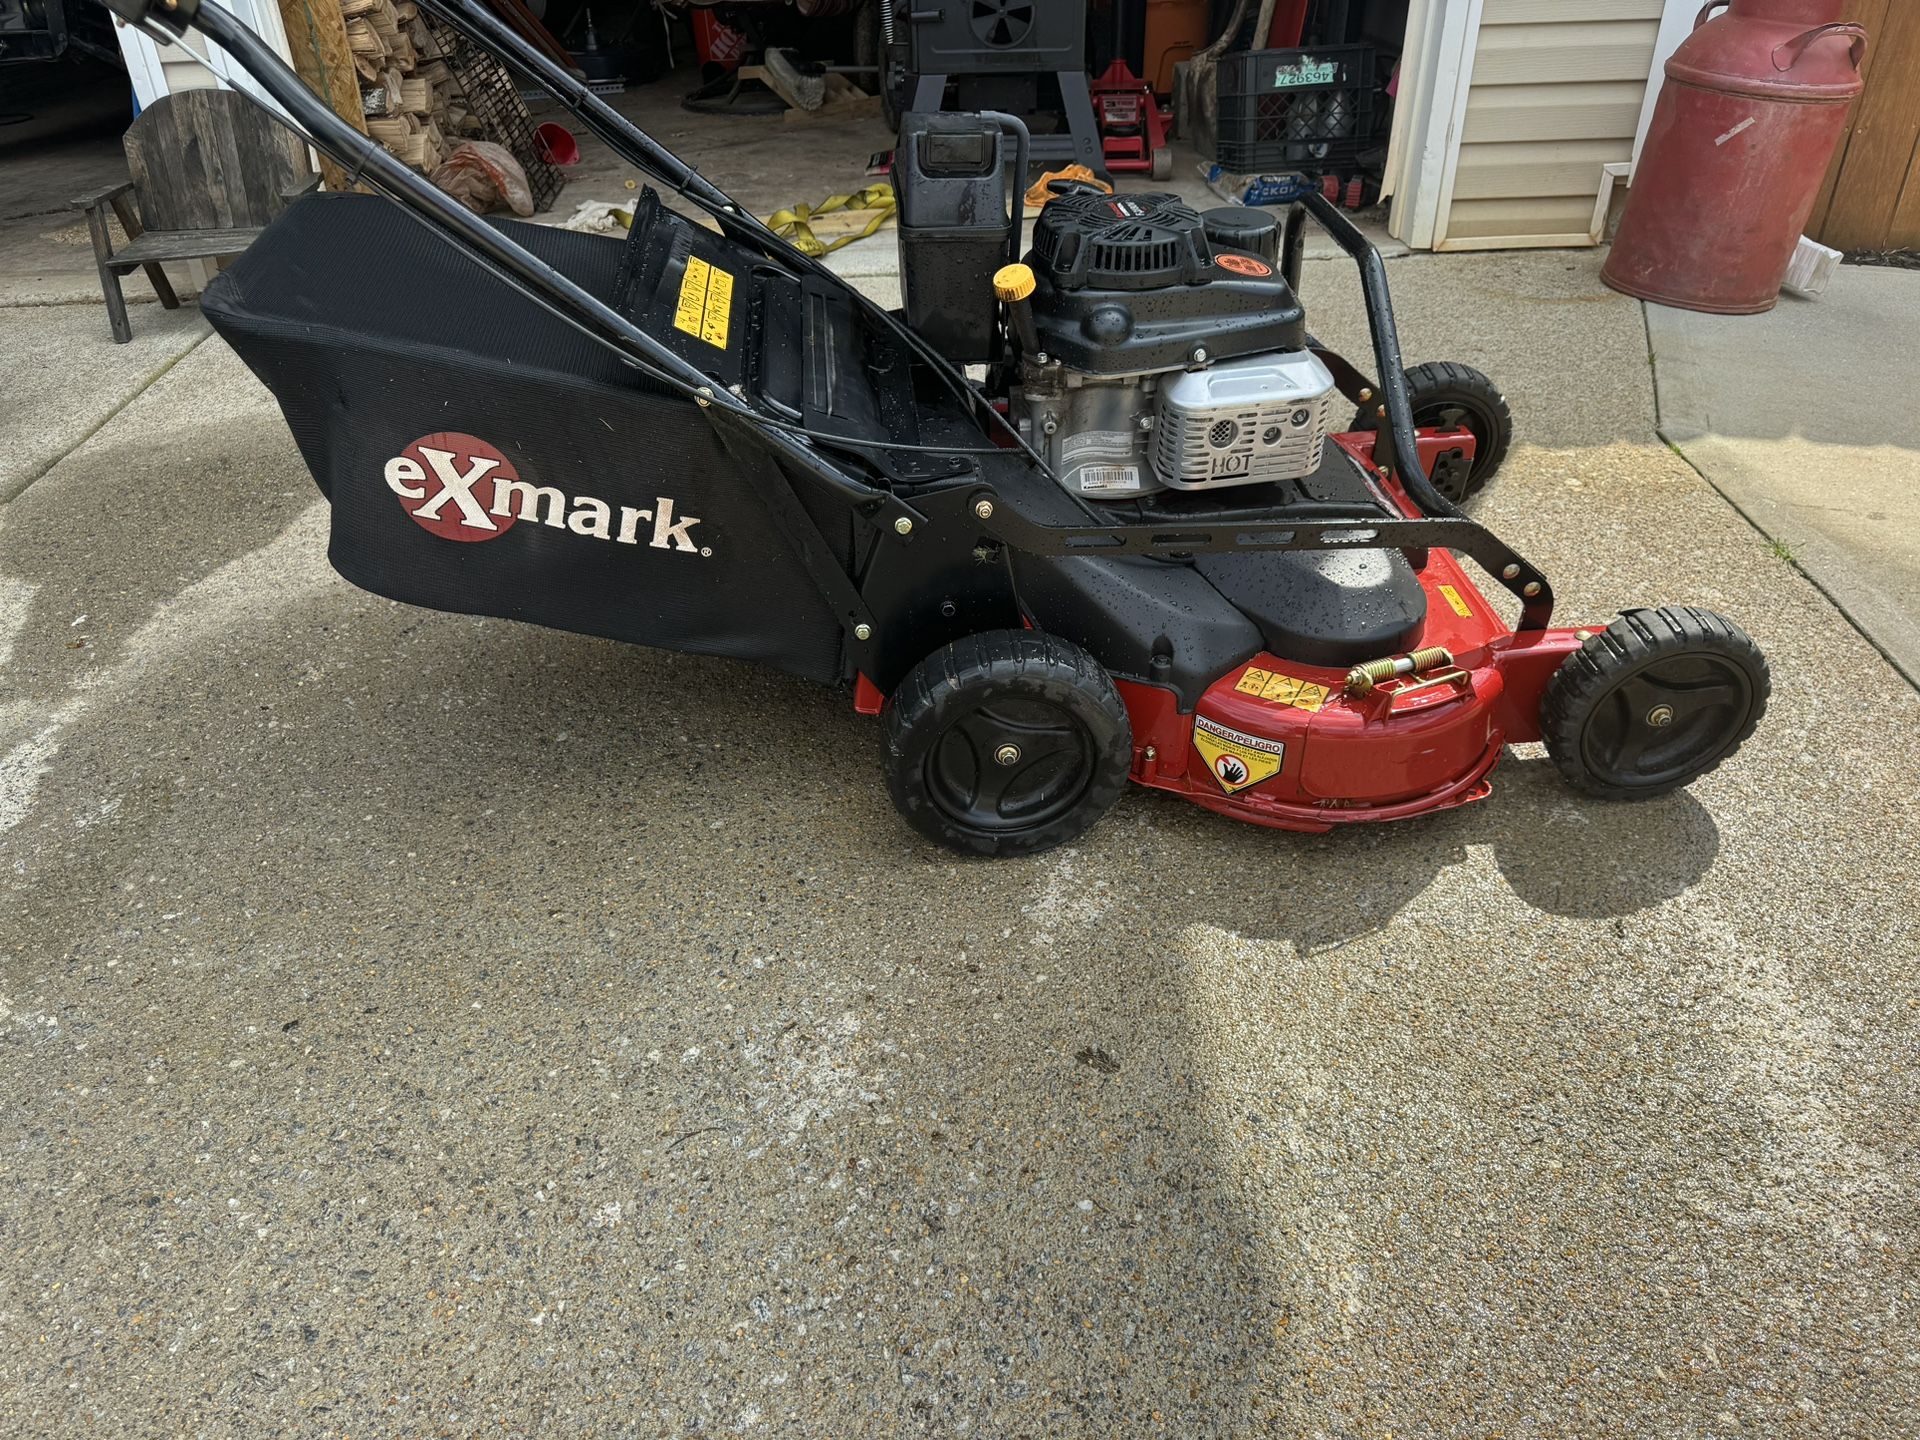 Exmark 30” Cut Commercial Mower